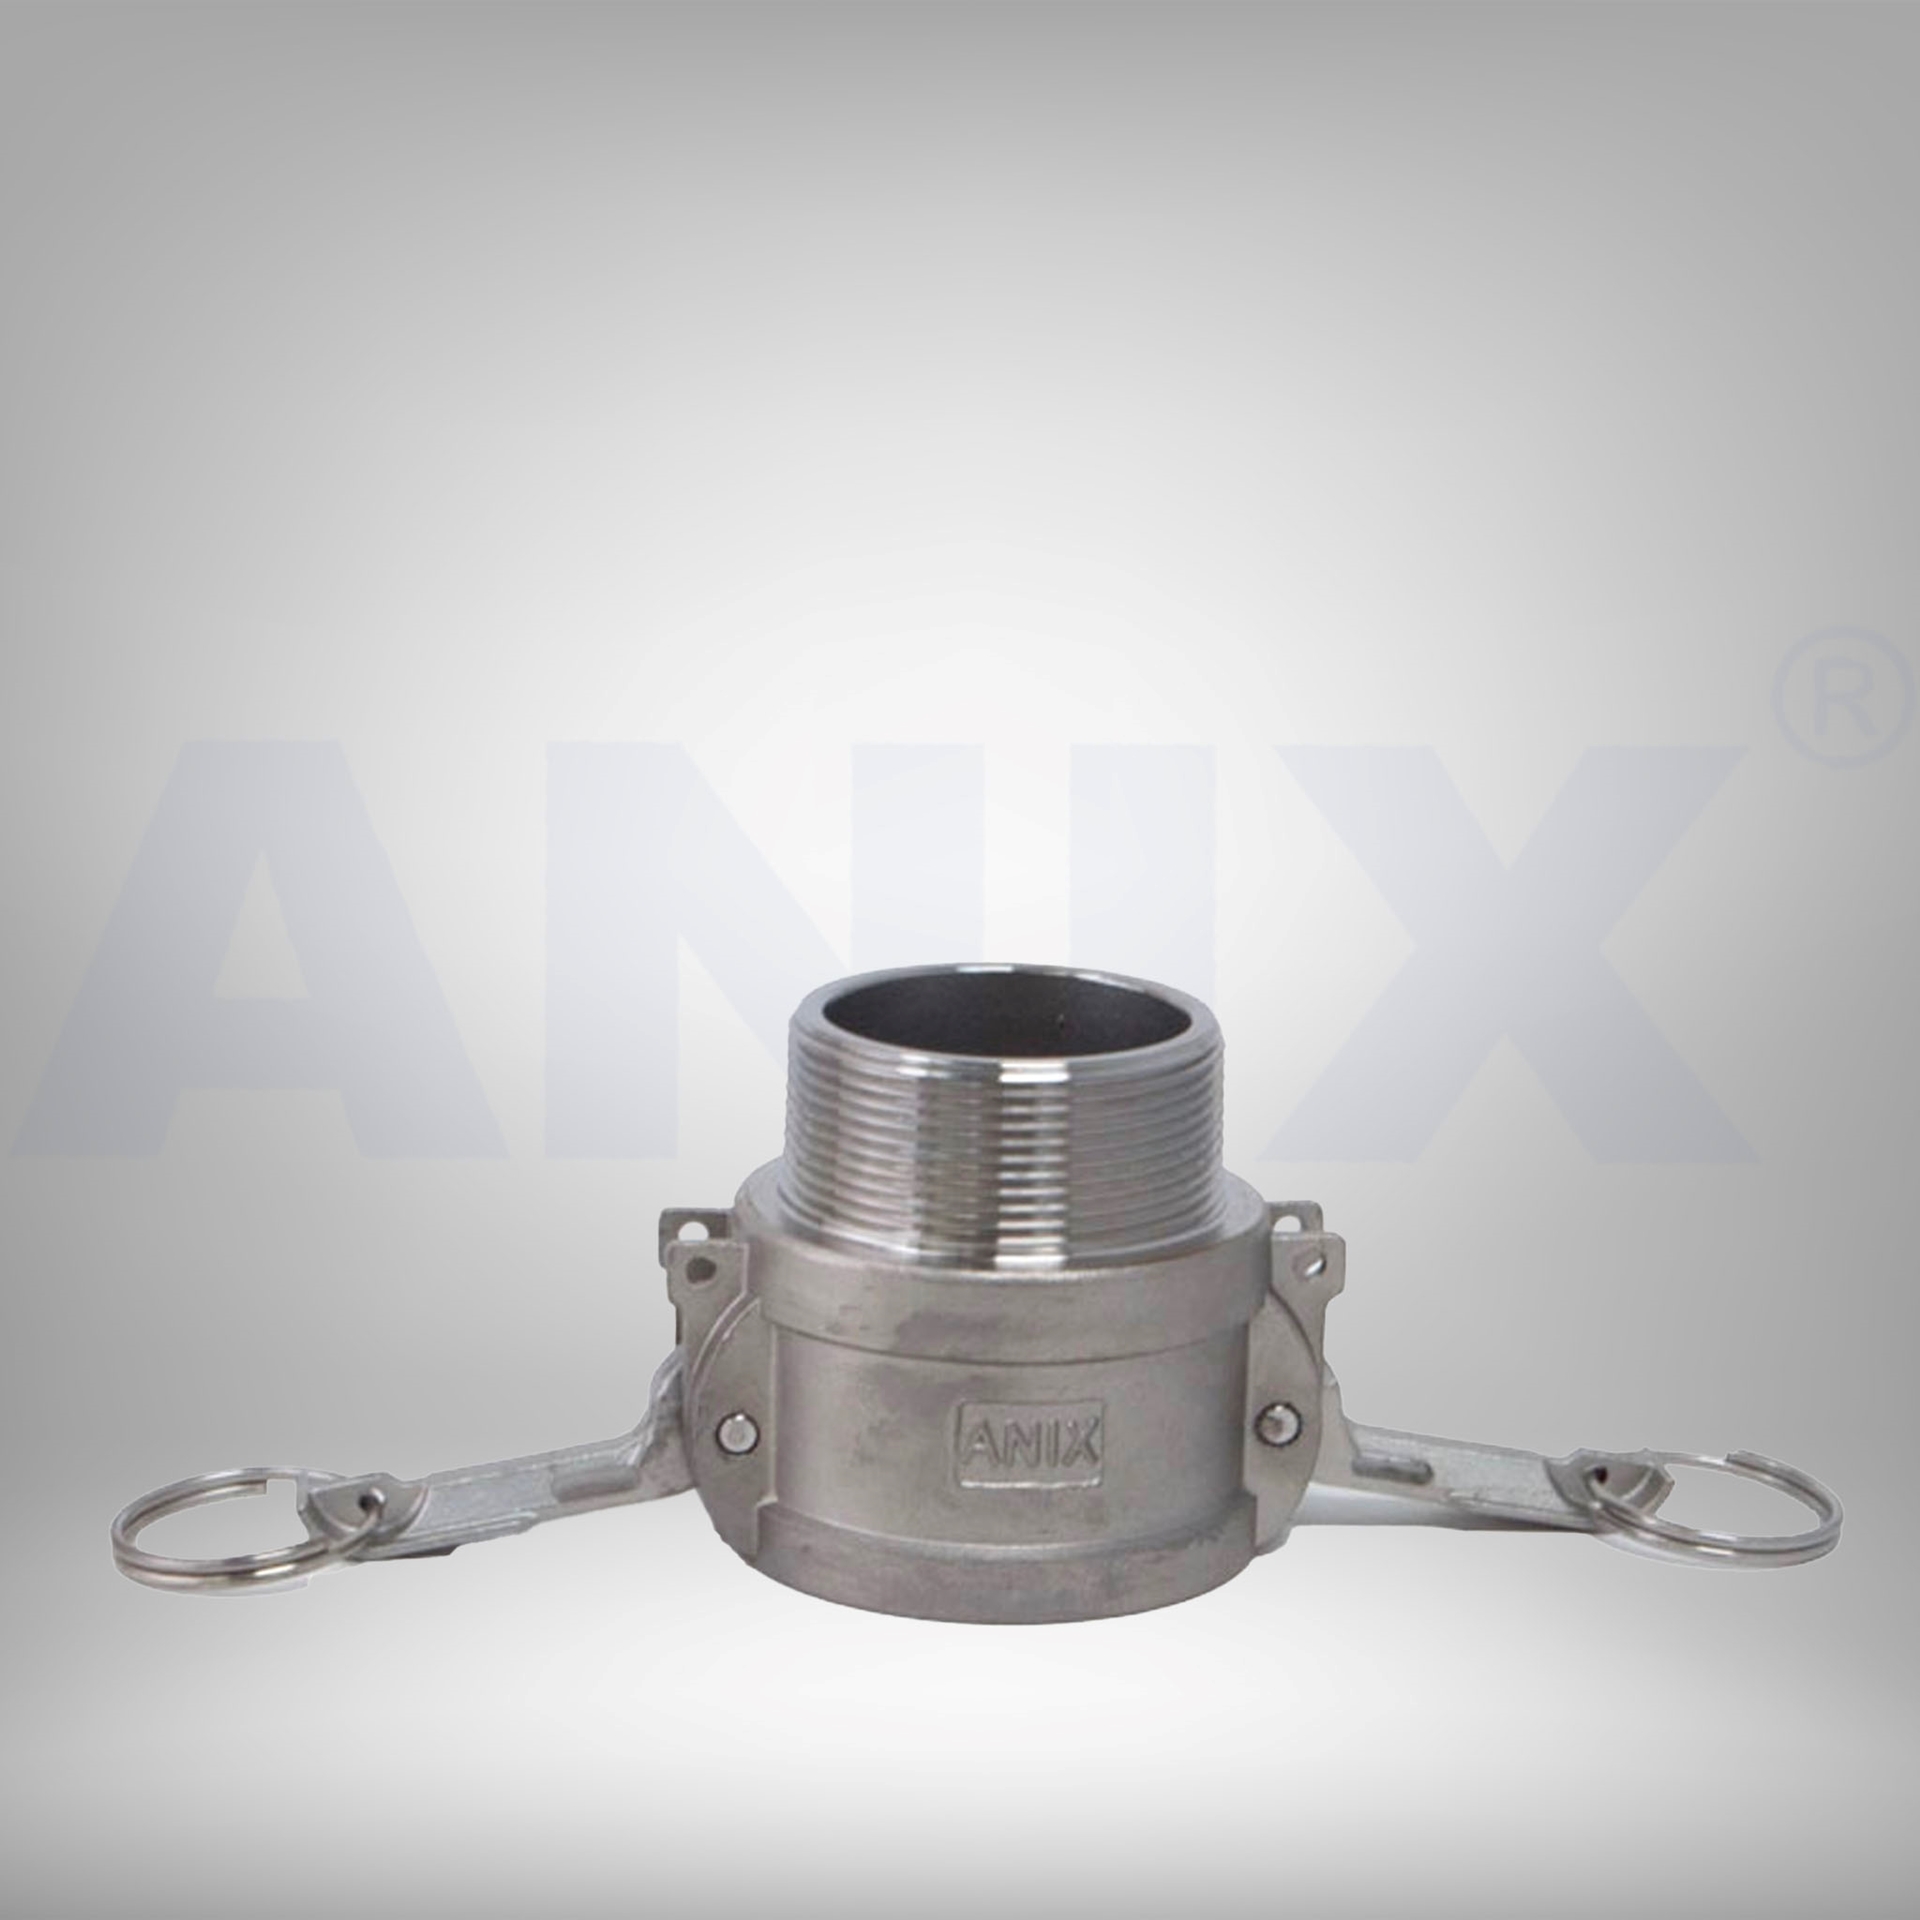 Picture of ANIX Stainless Steel 316 Camlock Coupling Type B